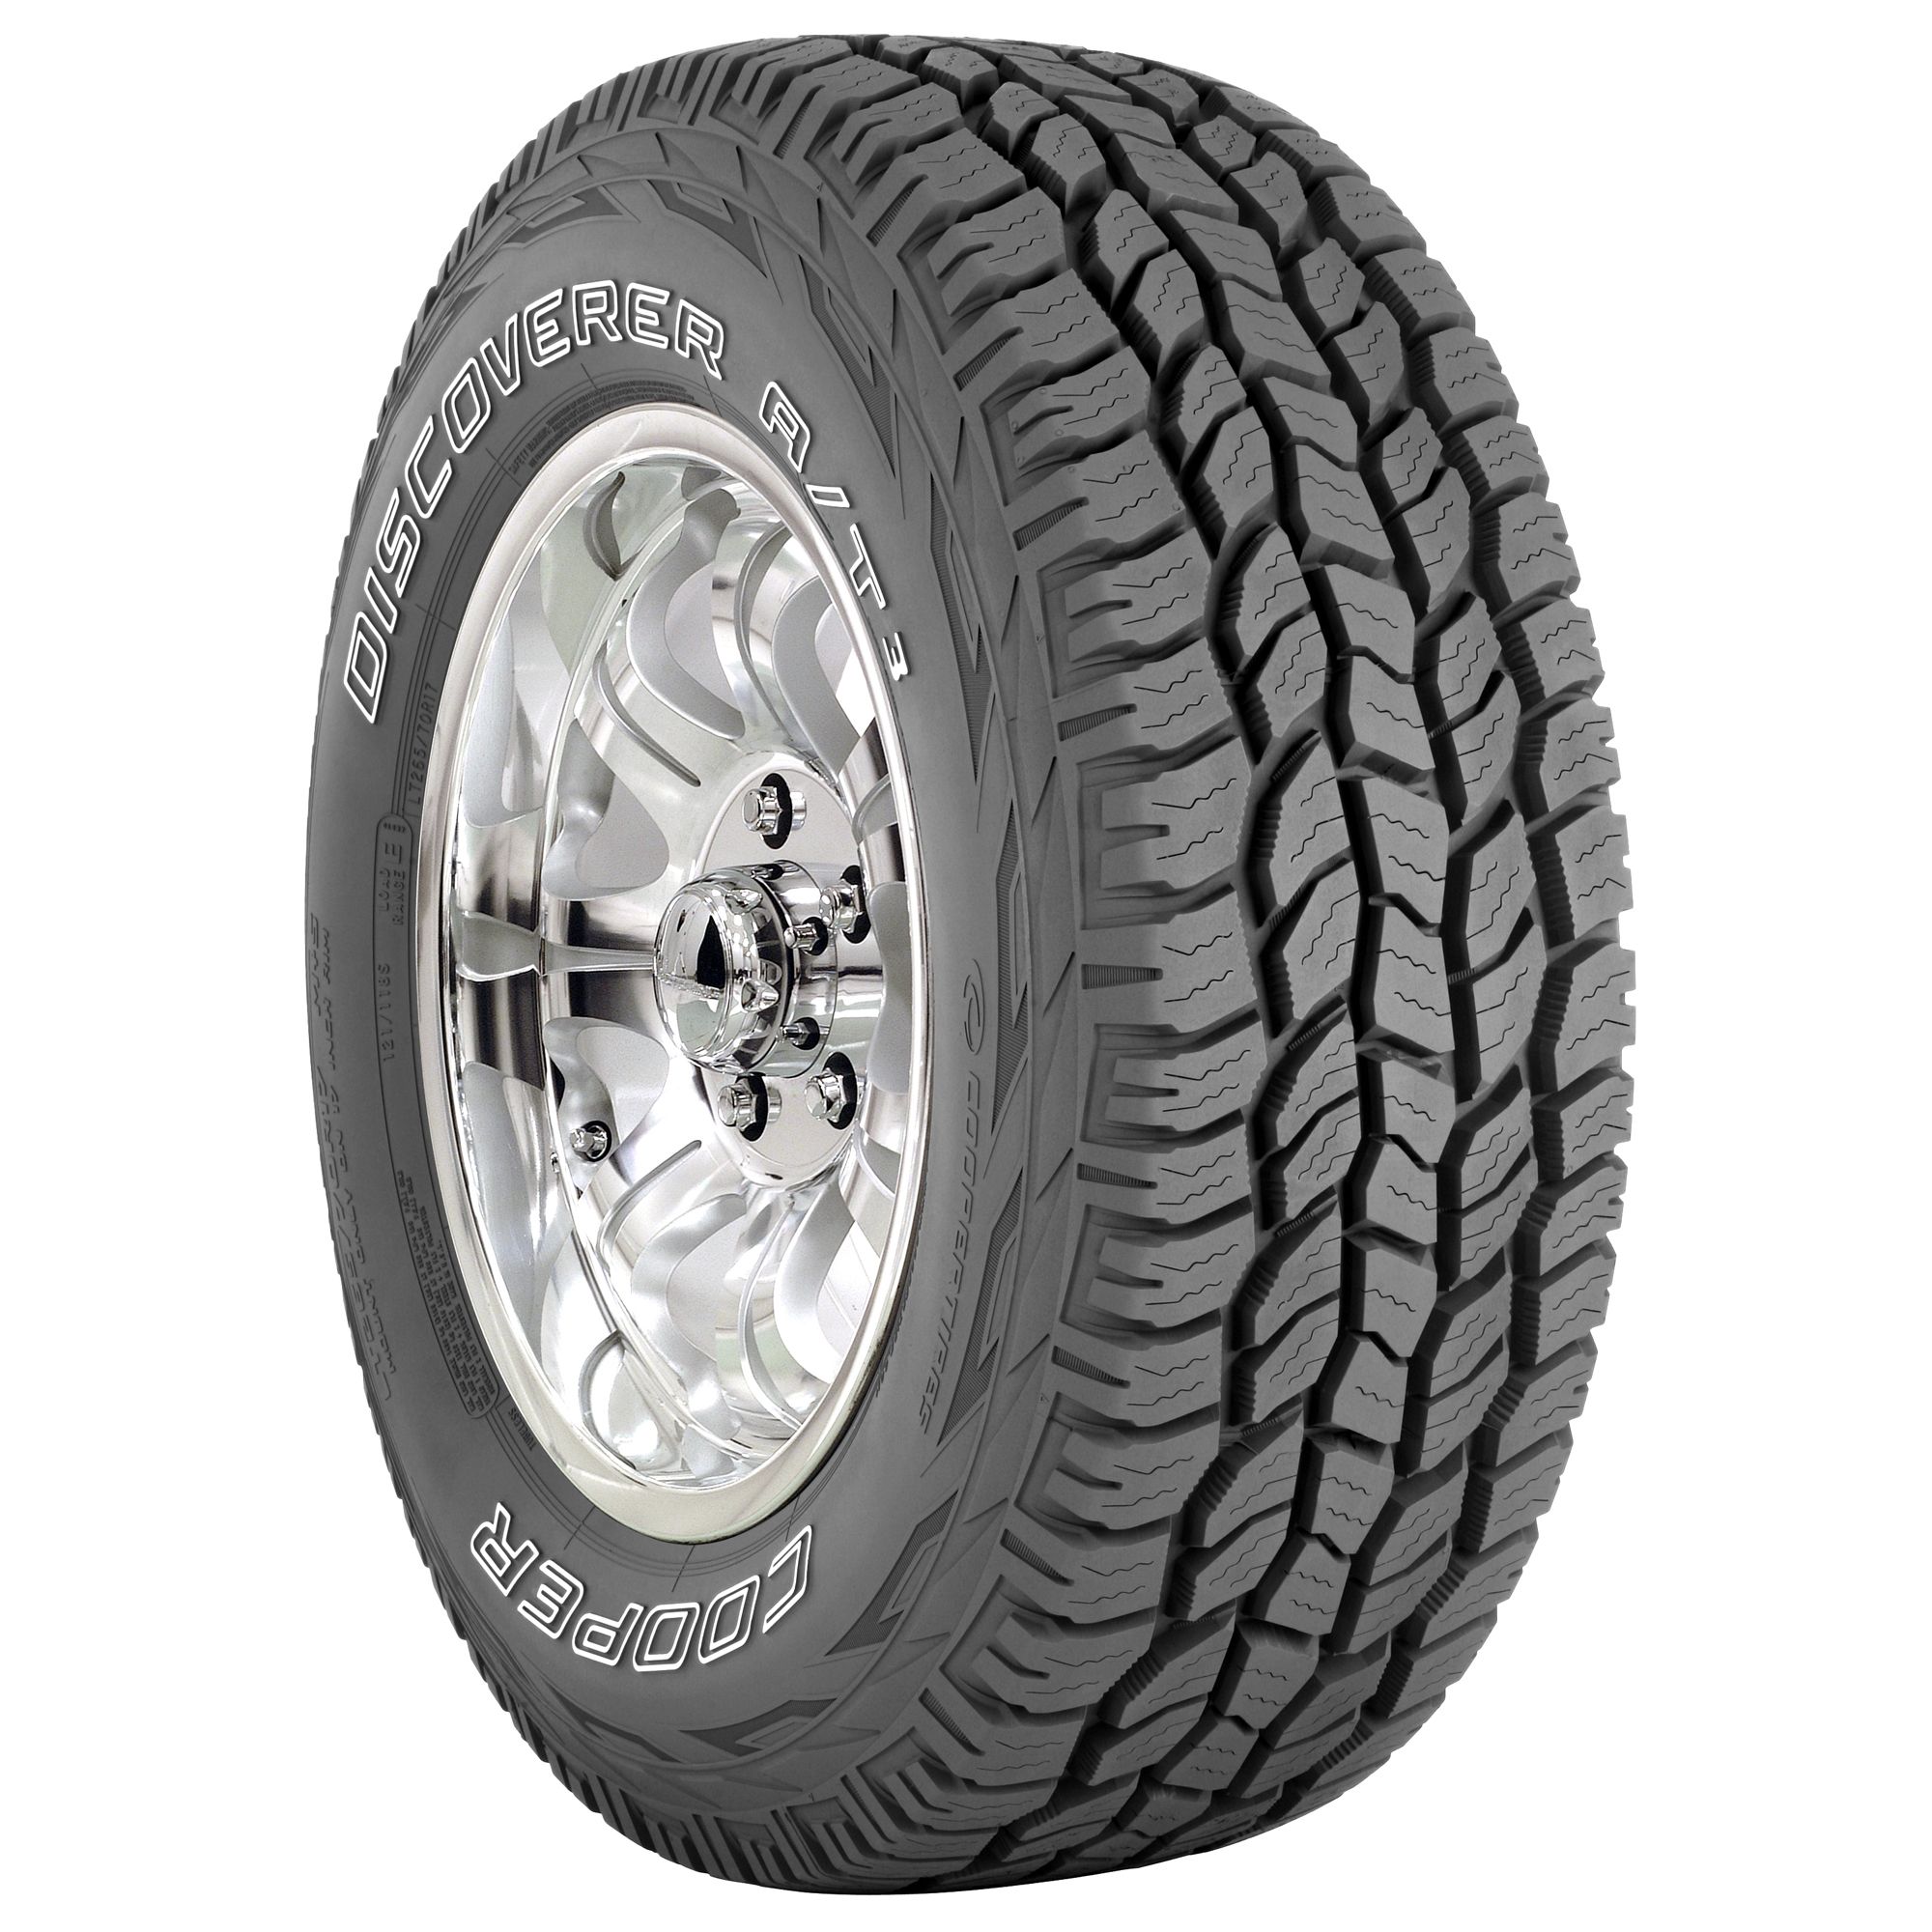 0029142737513 - DISCOVERER A/T3 - 235/75R17 109T OWL - ALL SEASON TIRE